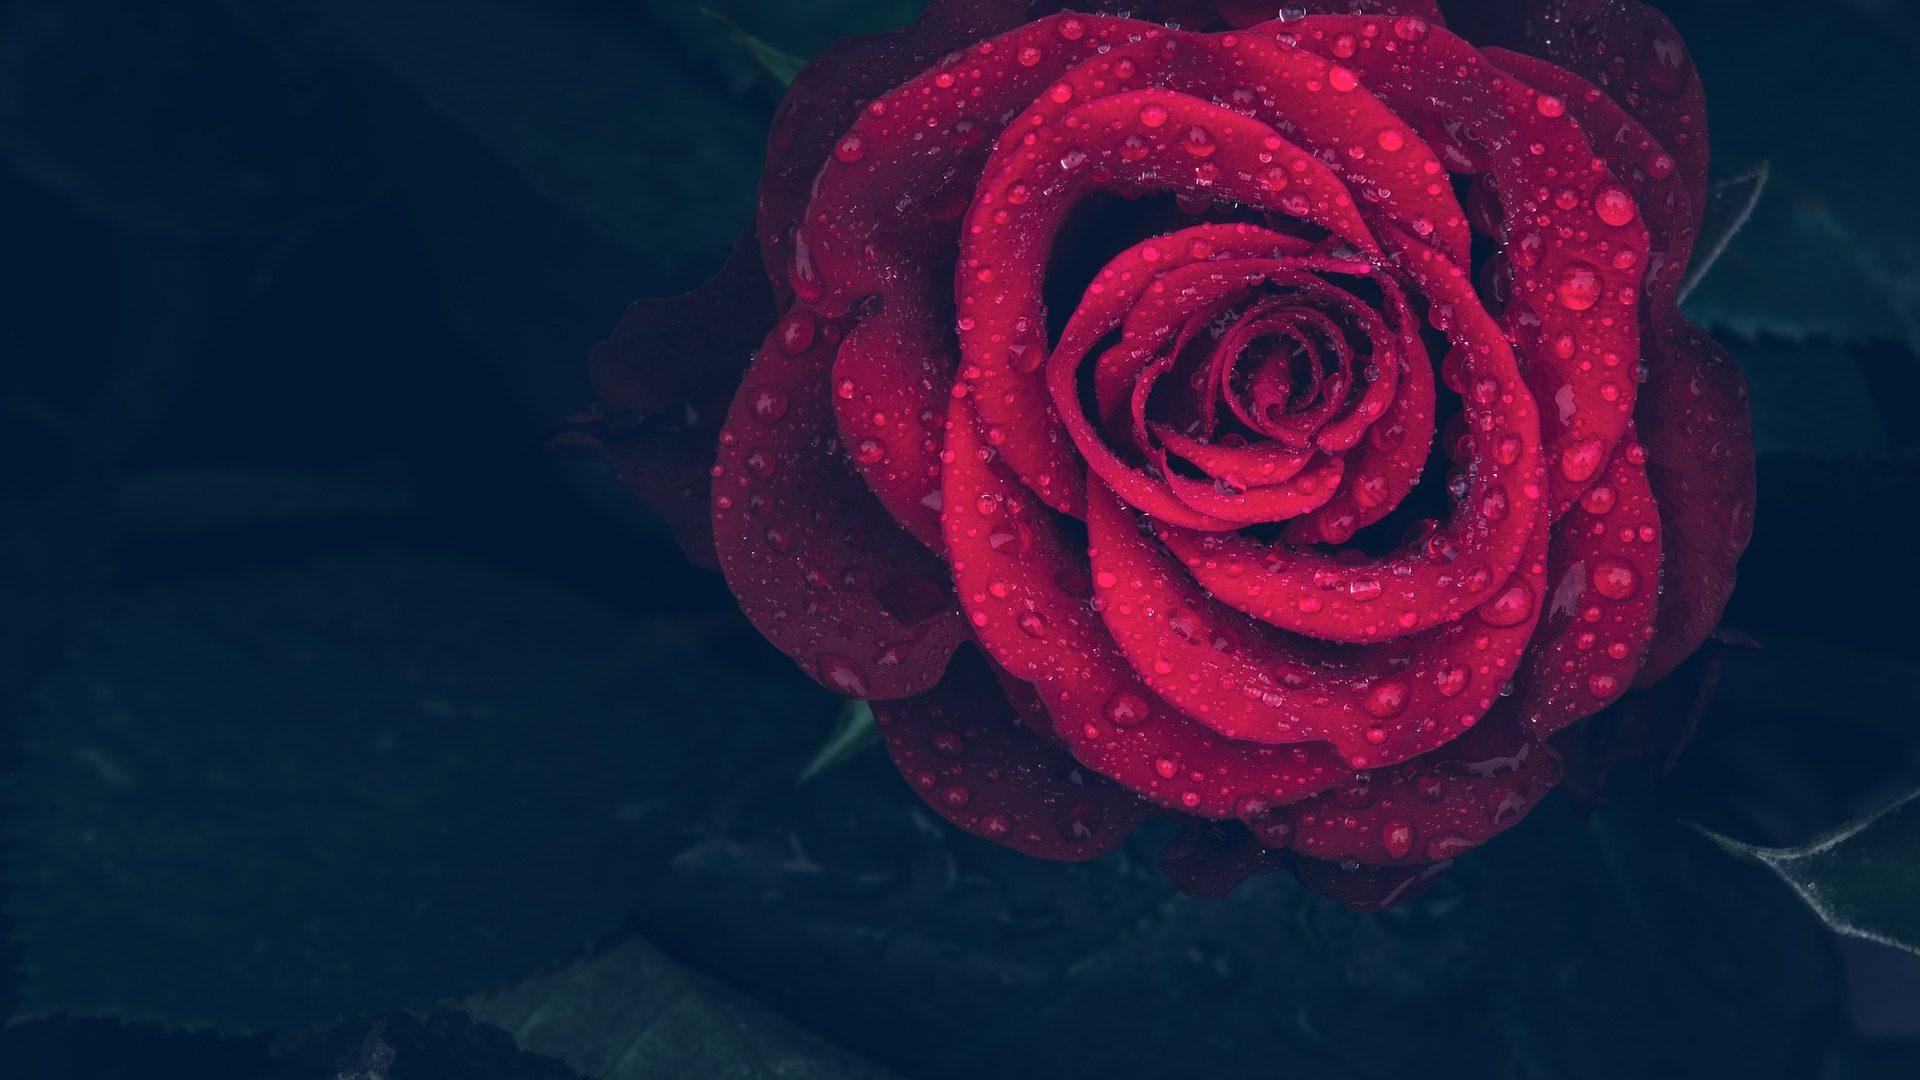 Beautiful Single Red Rose HD Wallpaper With Dark Background